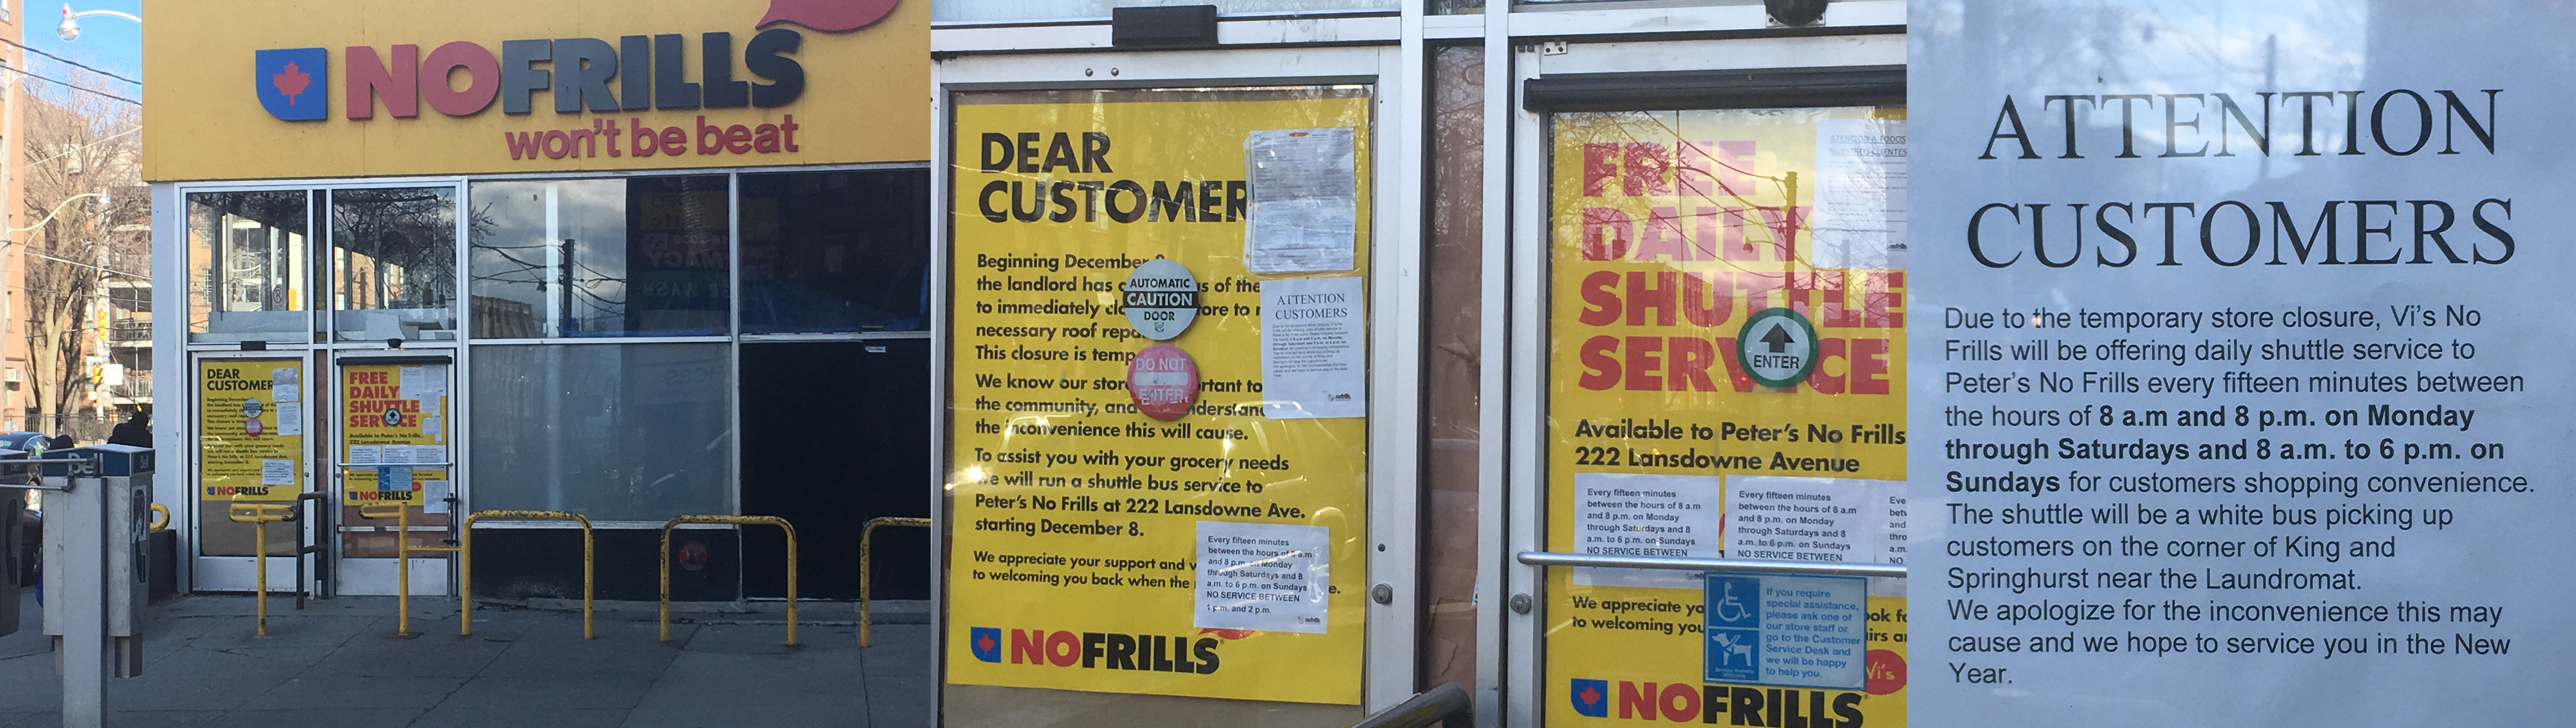 attention supermarket shoppers at No Frills in Parkdale - grocery store closing